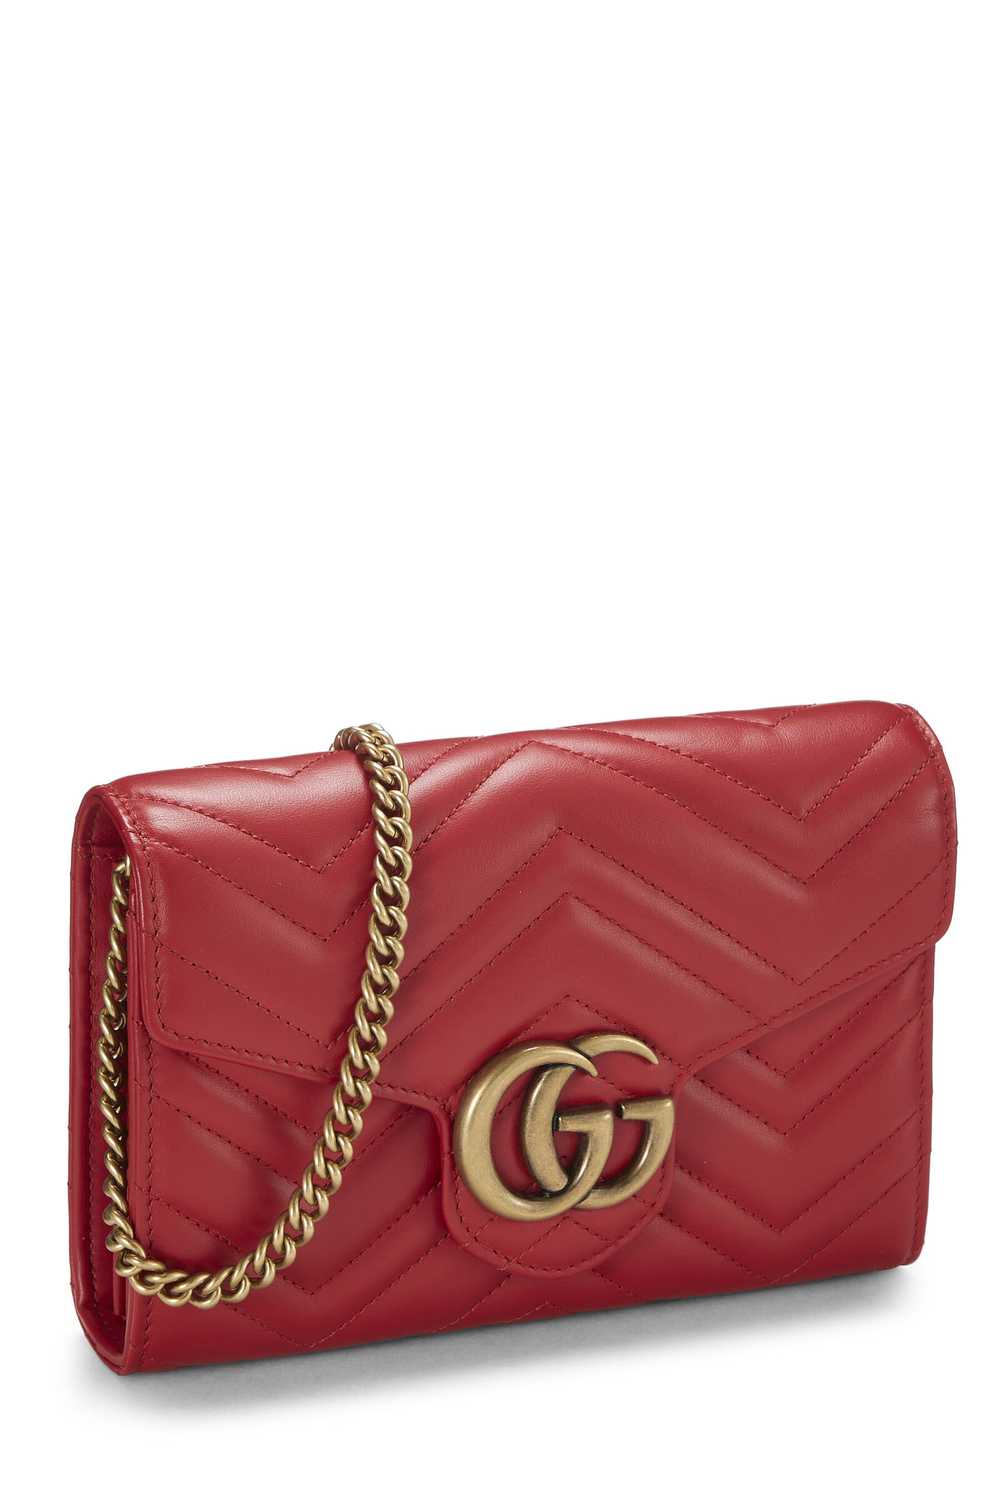 Red Leather GG Marmont Crossbody Small - image 2